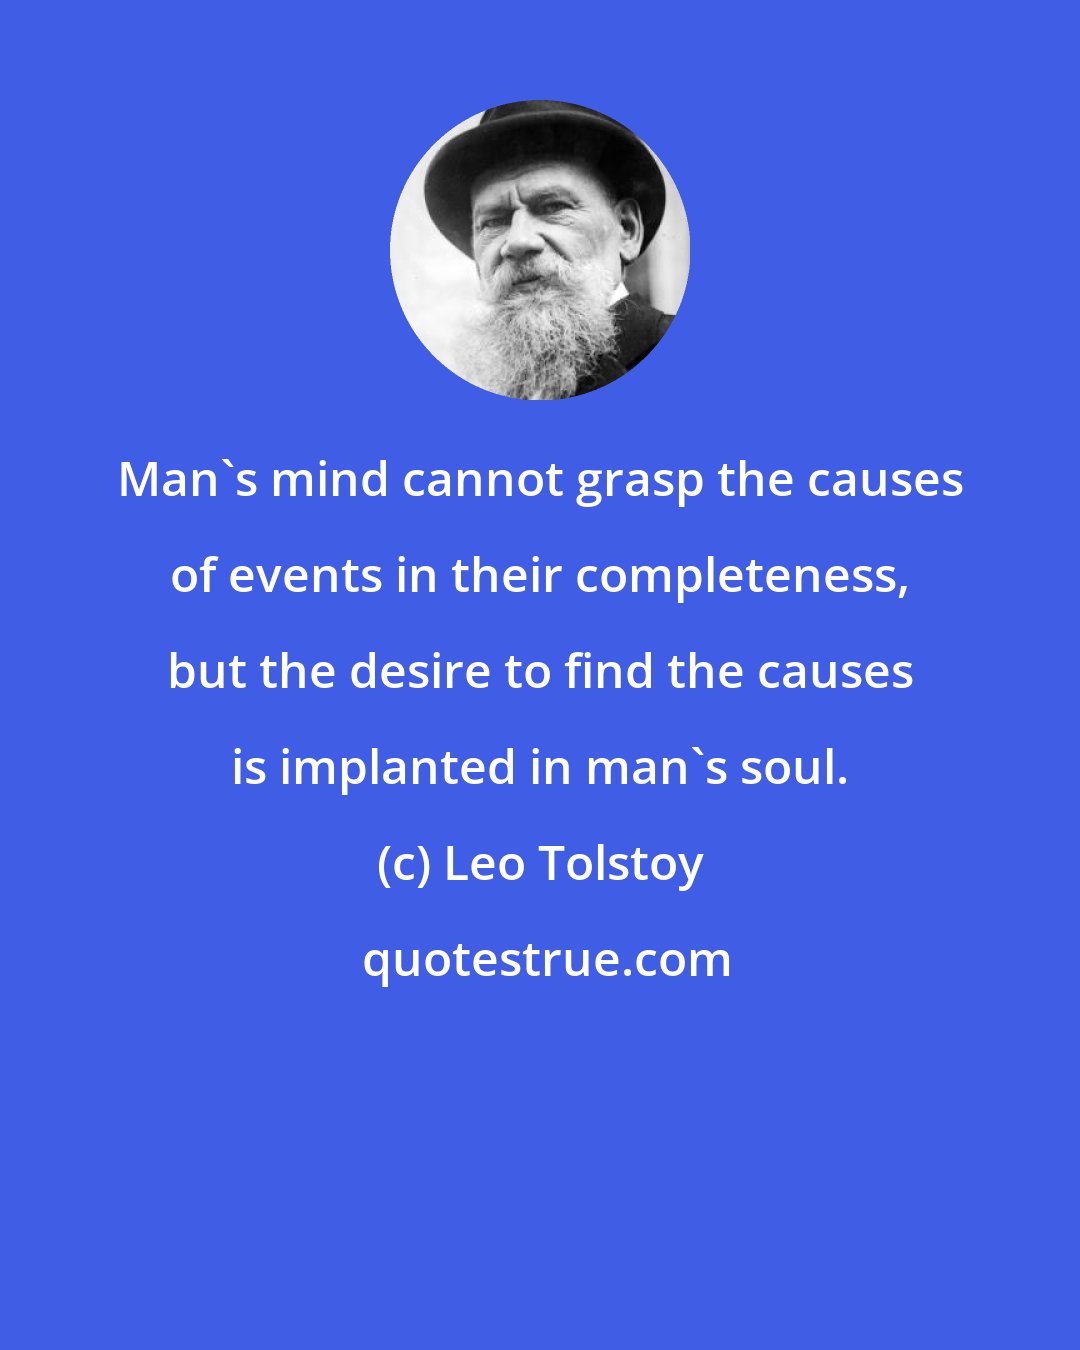 Leo Tolstoy: Man's mind cannot grasp the causes of events in their completeness, but the desire to find the causes is implanted in man's soul.